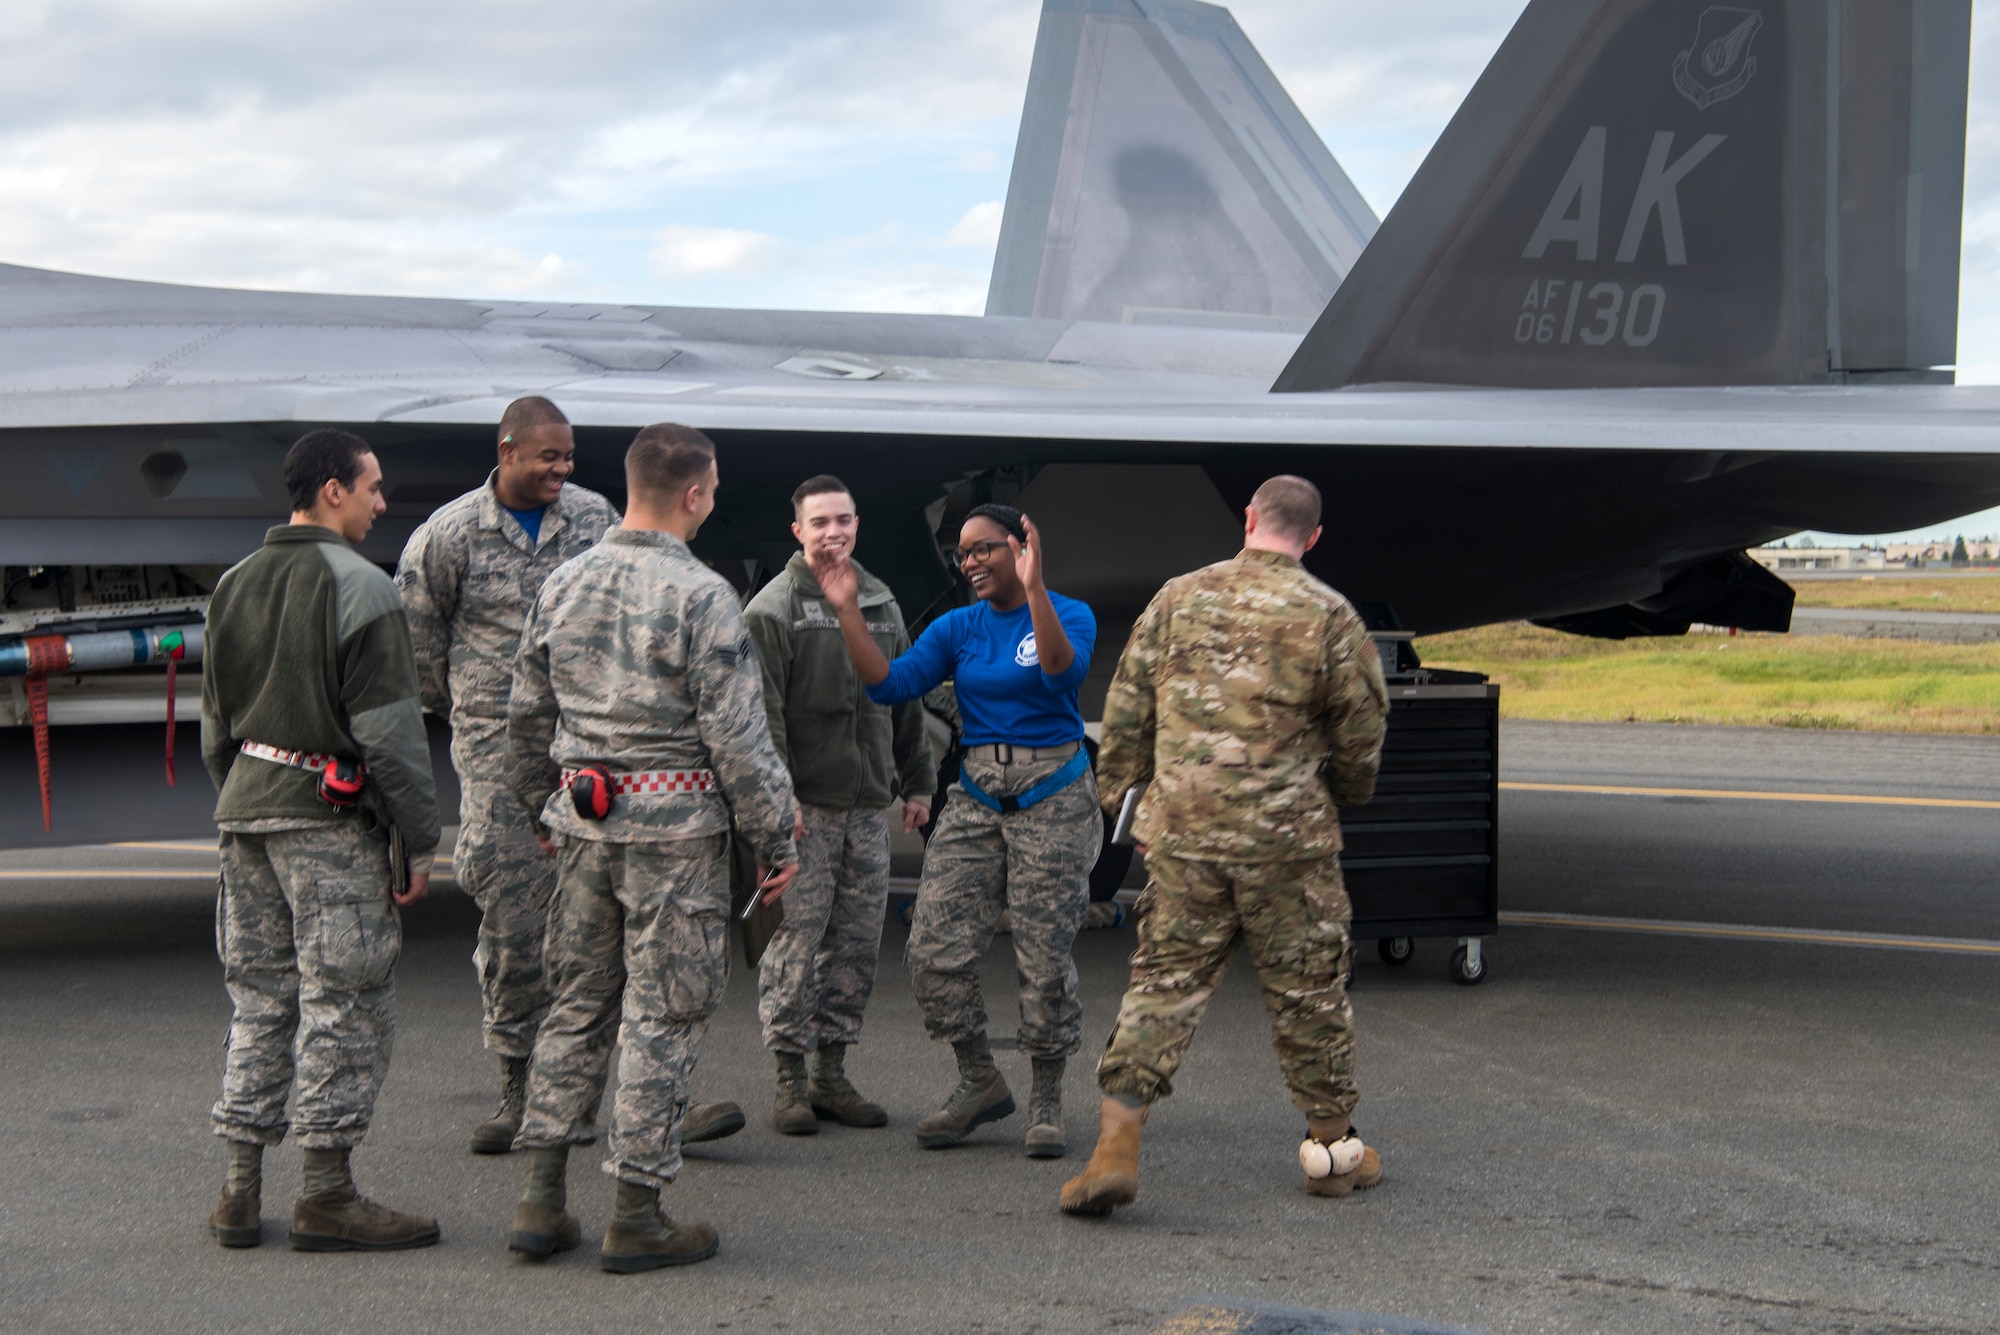 Service members from the 525th Aircraft Maintenance Unit crew celebrate after completing the quarterly load competition at Joint Base Elmendorf-Richardson, Alaska, Oct. 26, 2018. During the competition, two teams tested their skills as load crew members for the F-22 Raptor. The event demonstrates the skill level and knowledge of all JBER aircraft maintainers.